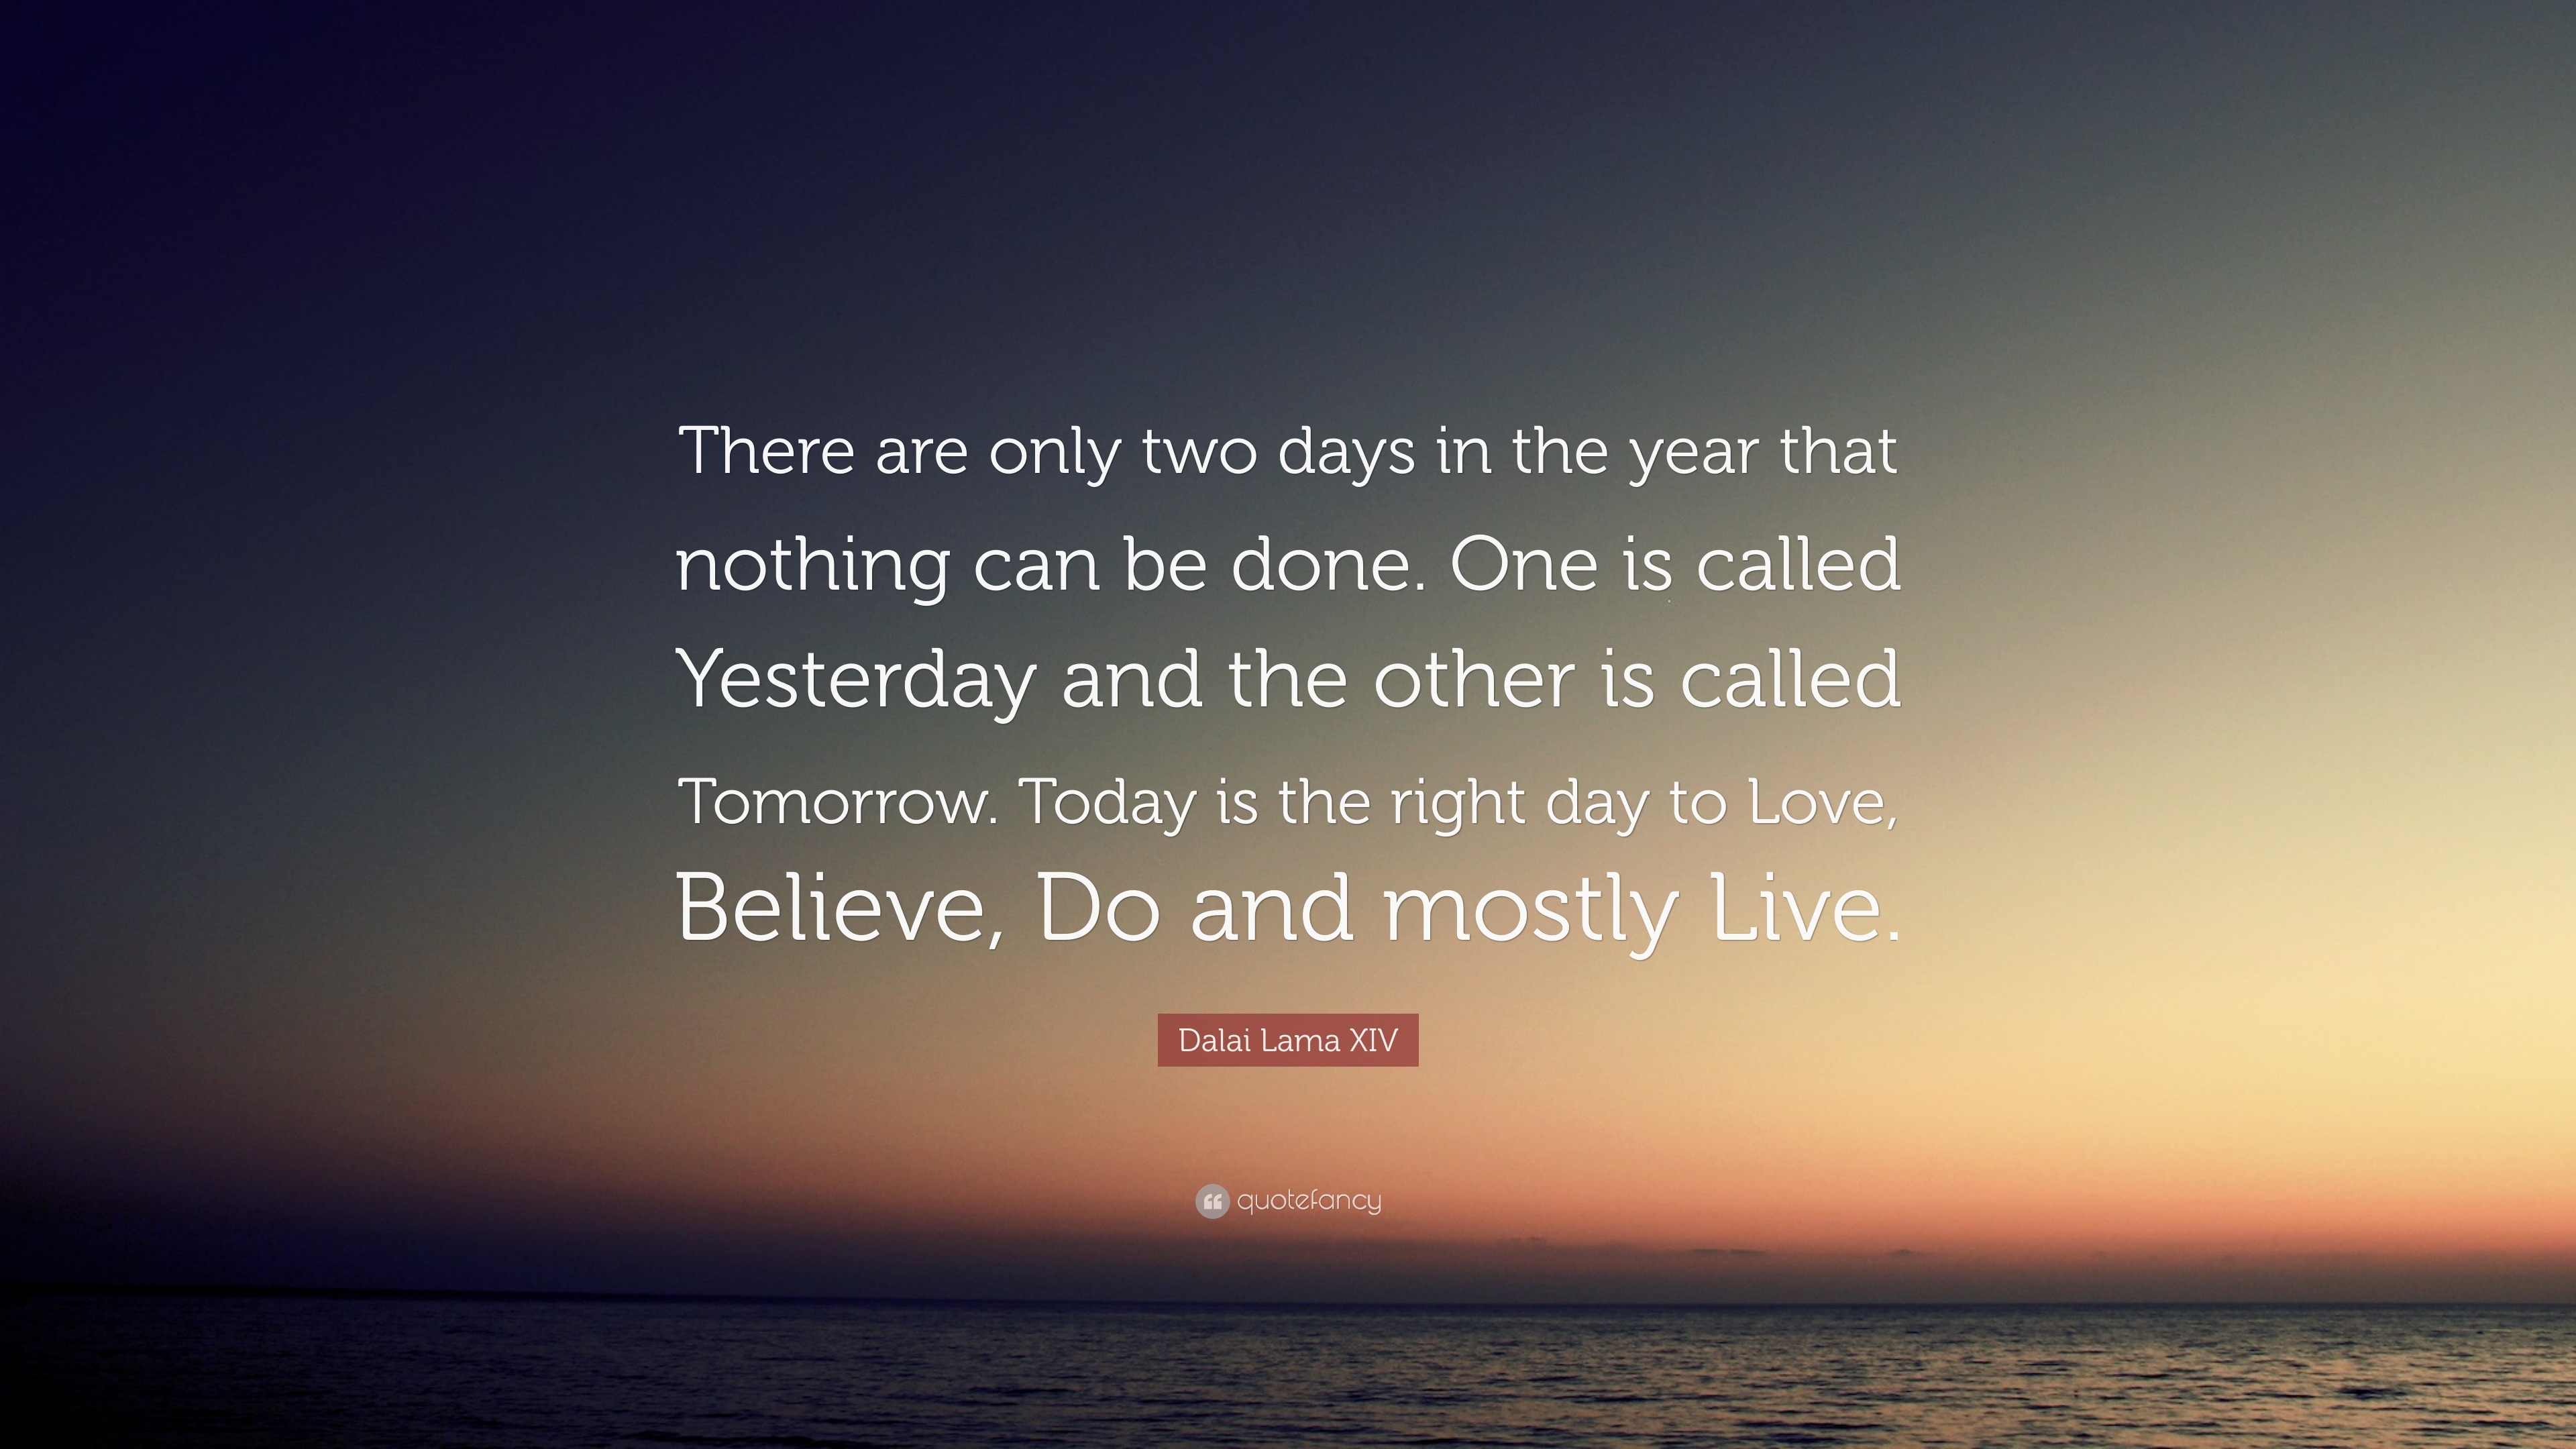 Dalai Lama There Are Only Two Days In The Year That Nothing Can Be Done